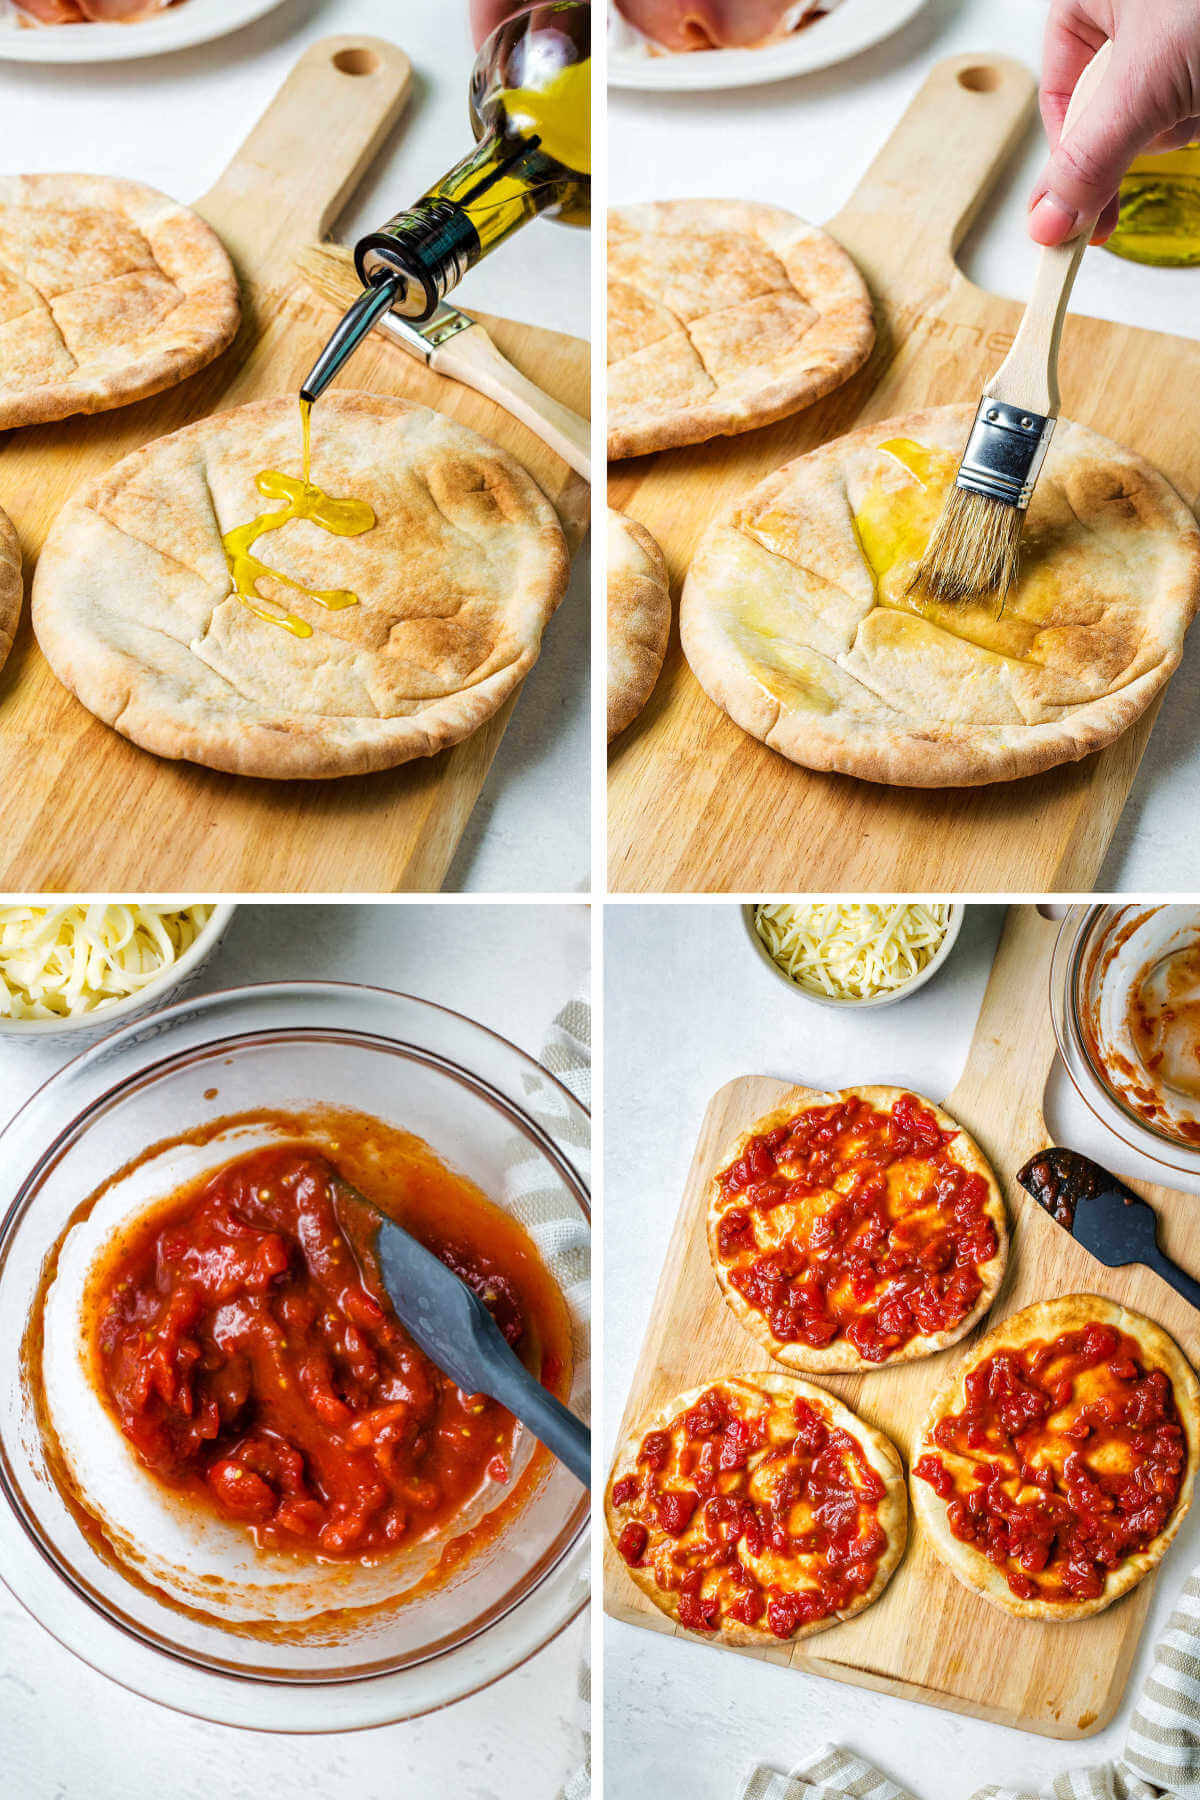 brushing pita bread rounds with olive oil; mixing crushed tomatoes into pizza sauce for pita bread pizzas.